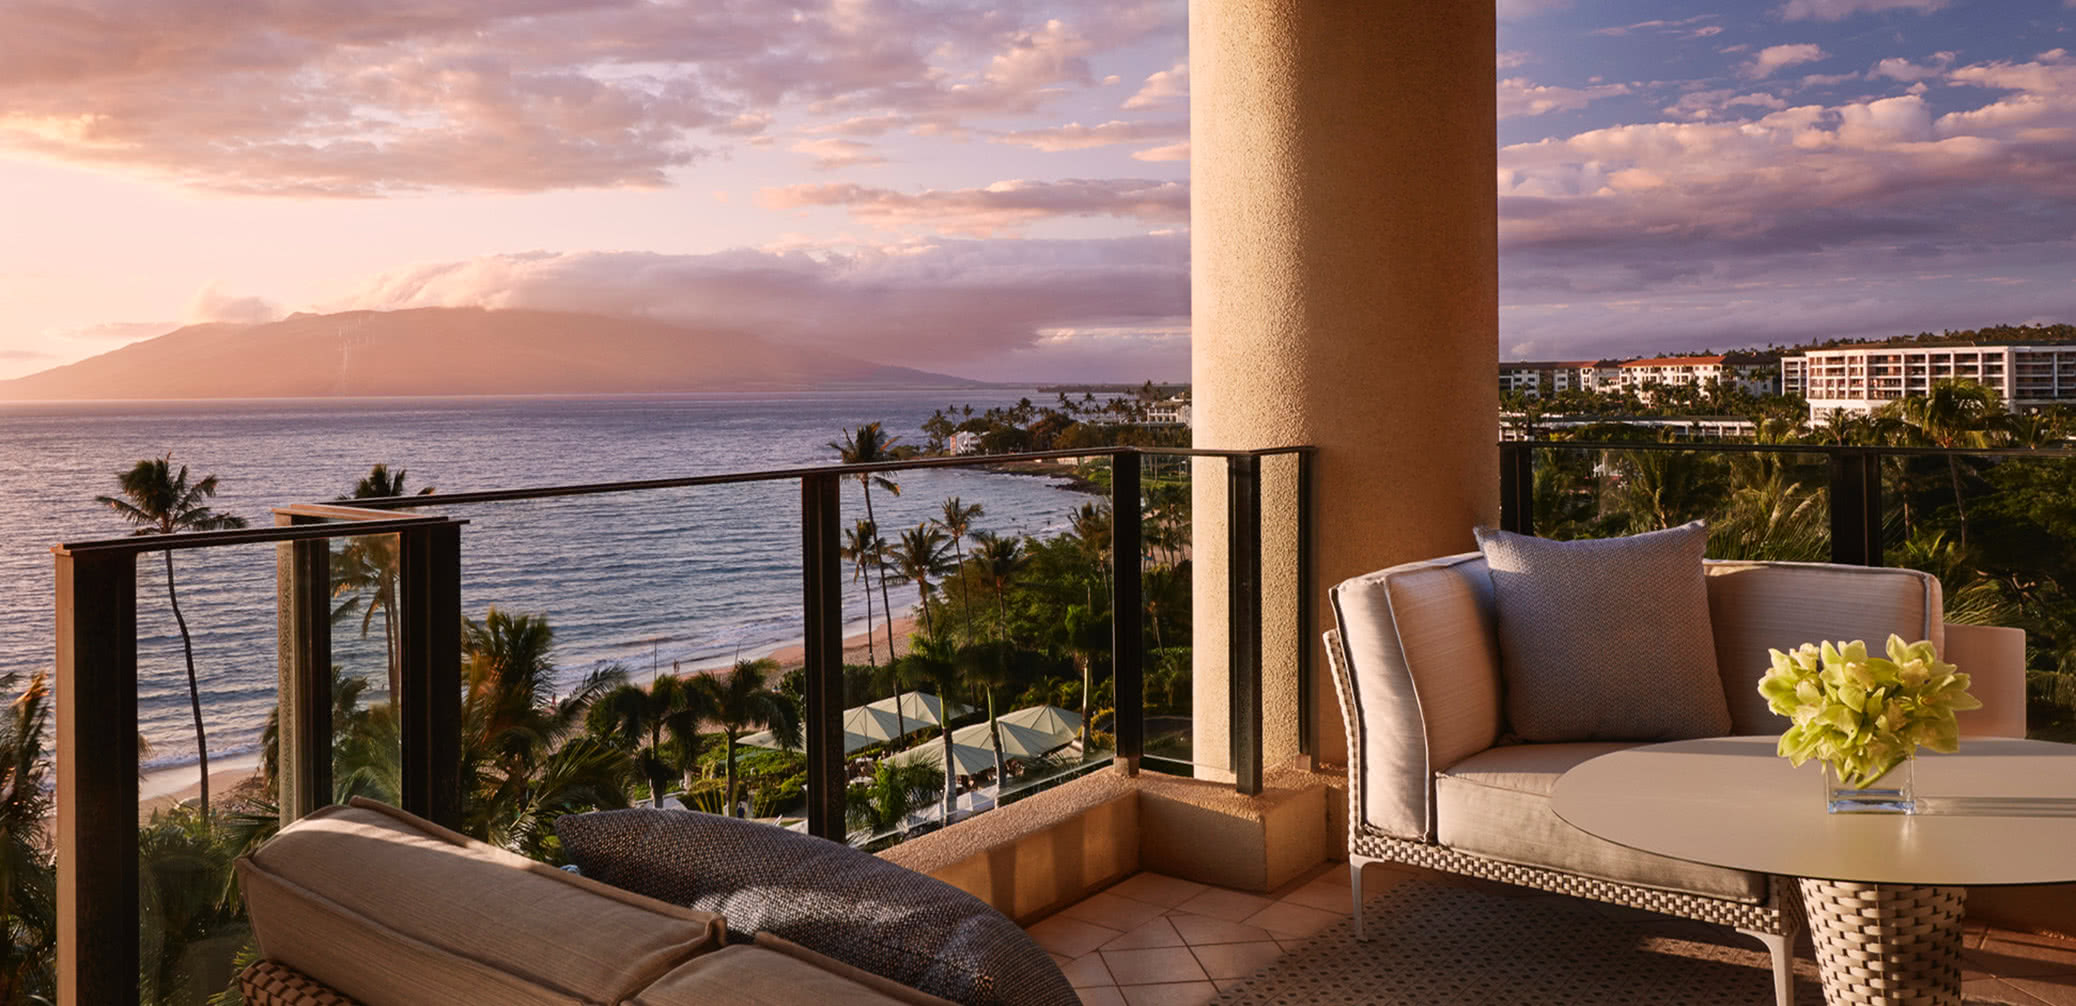 Four Seasons Vs Andaz Maui: Which Is Best?